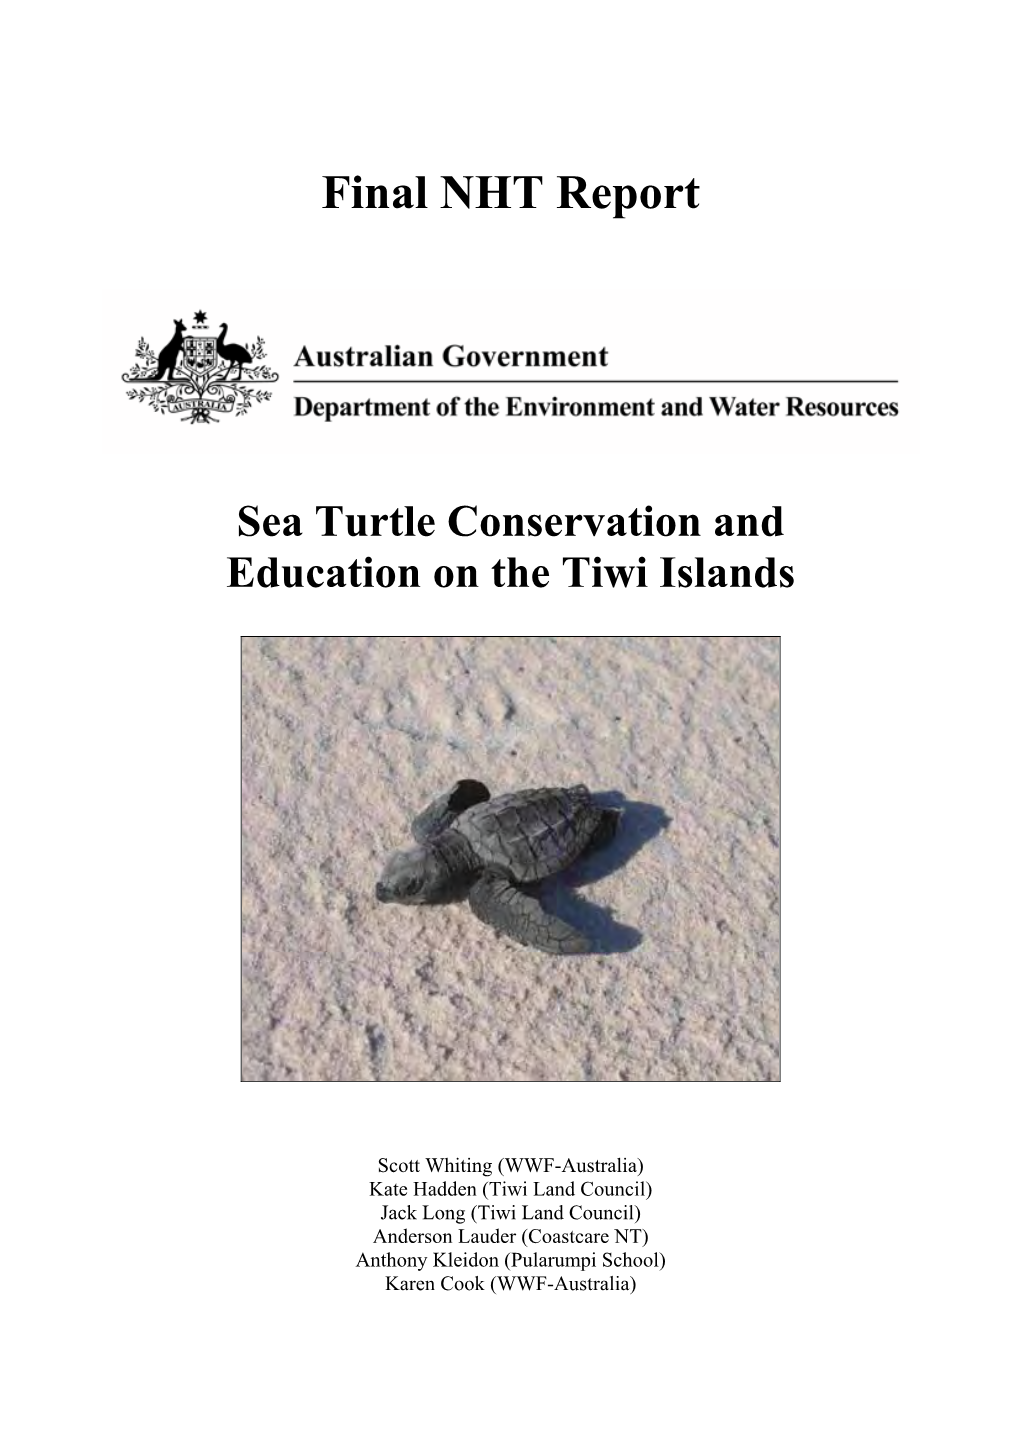 Sea Turtle Conservation and Education on the Tiwi Islands